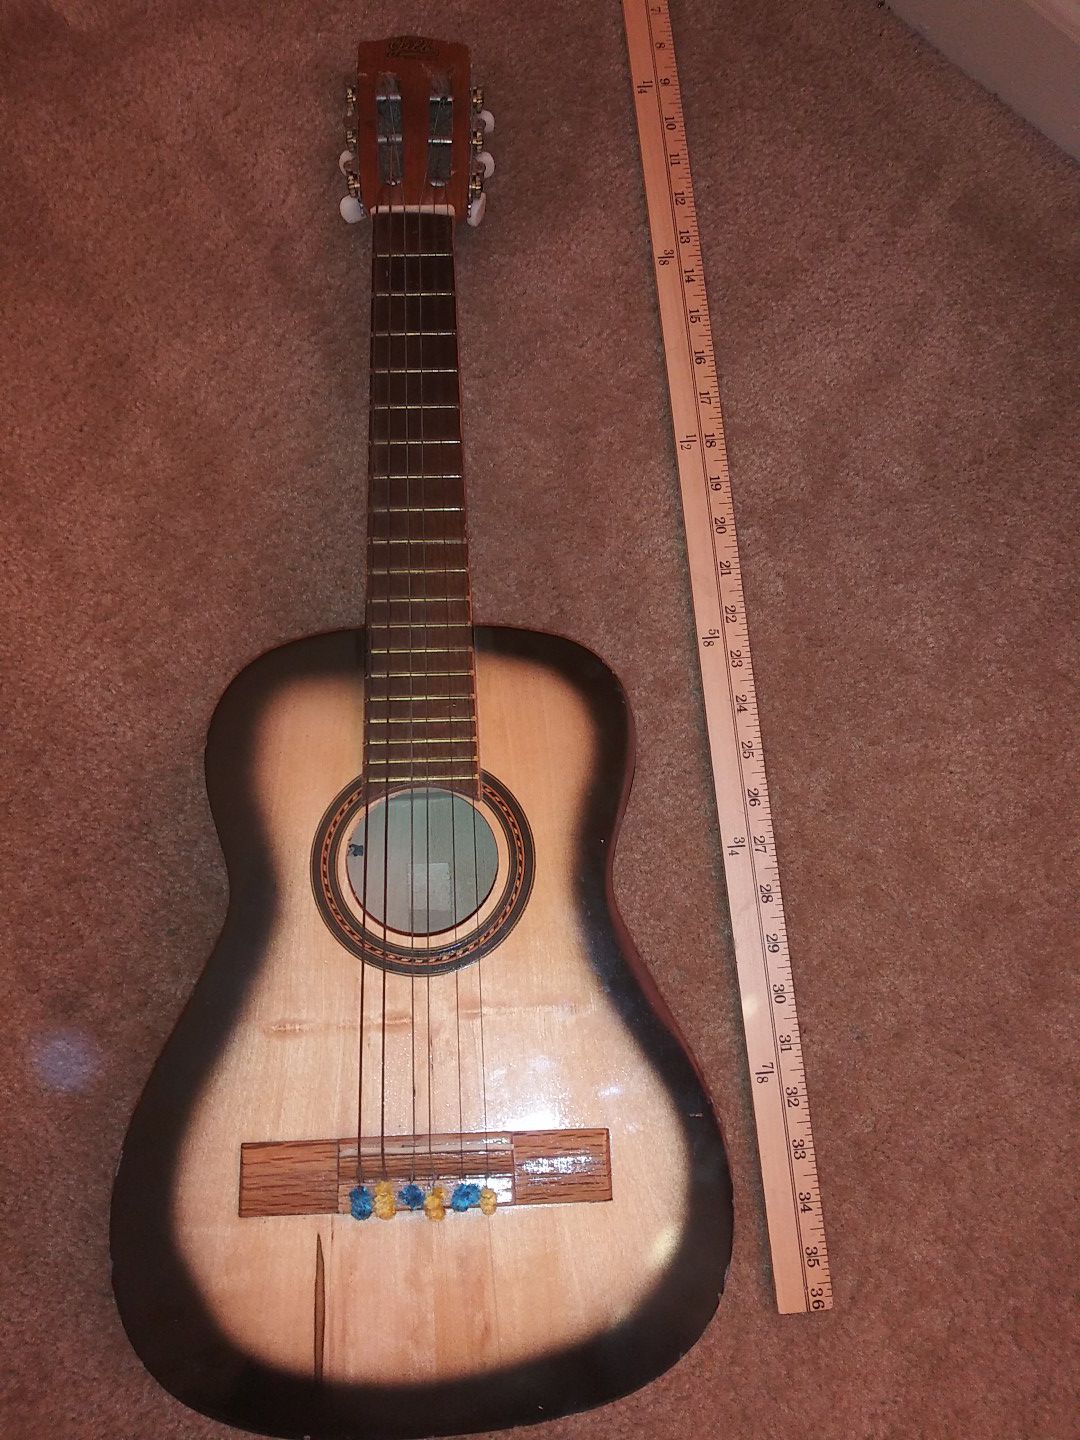 Small 6 string acoustic guitar